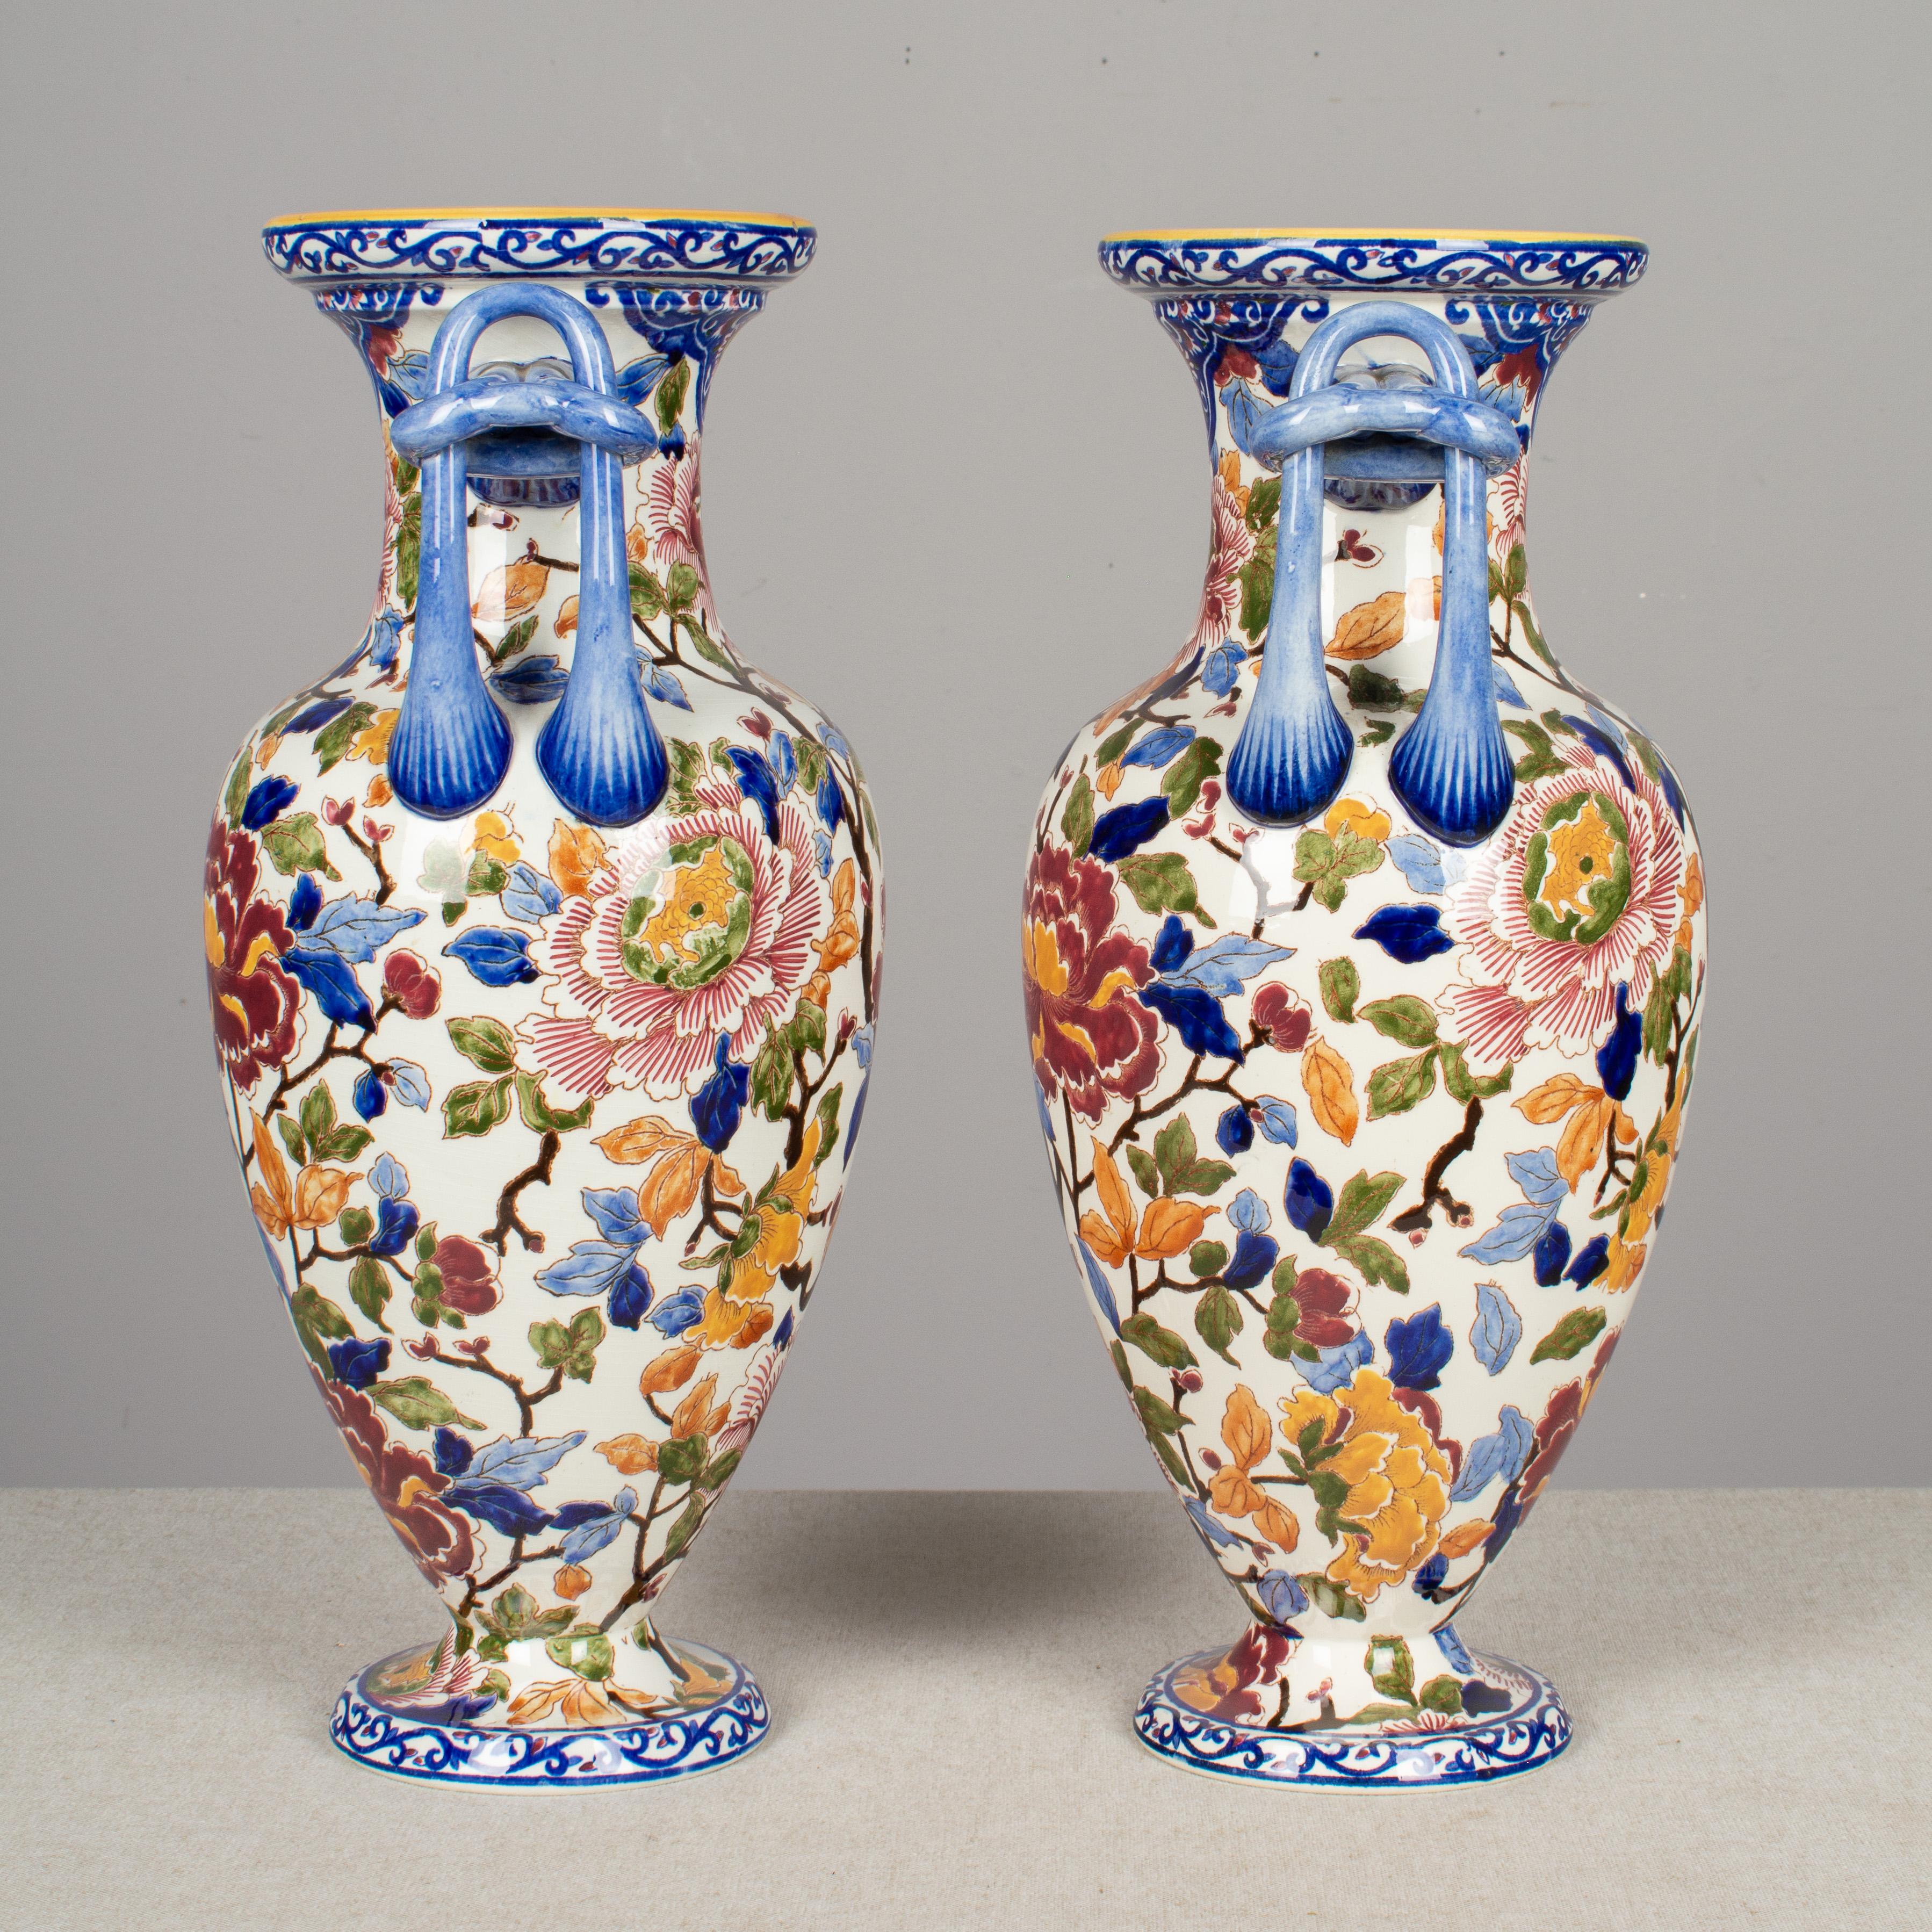 French Provincial Pair of French Faience Gien Vases